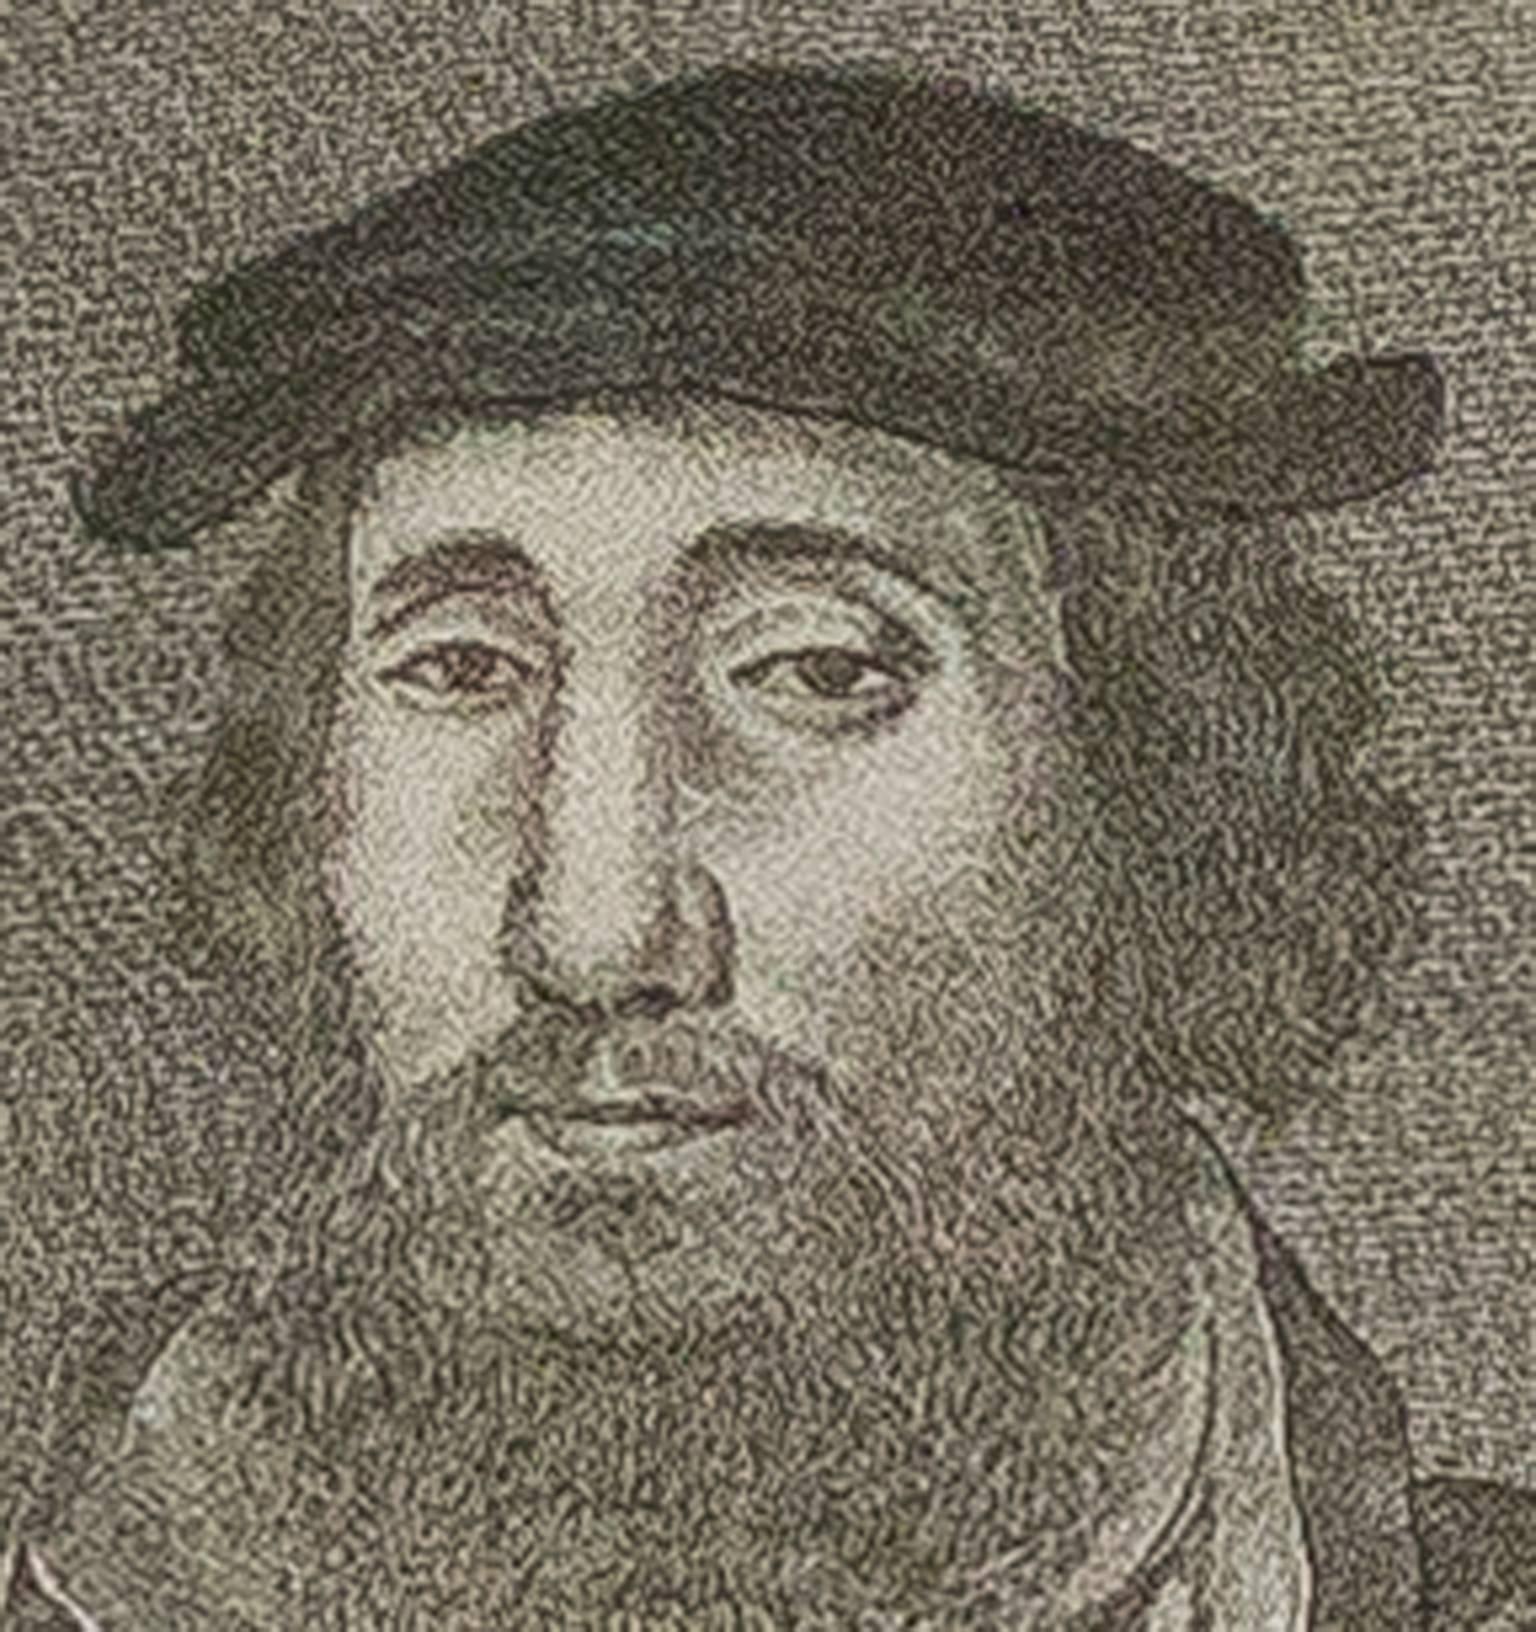 17th century engraving black and white portrait male subject beard hat European - Print by Wenceslaus Hollar